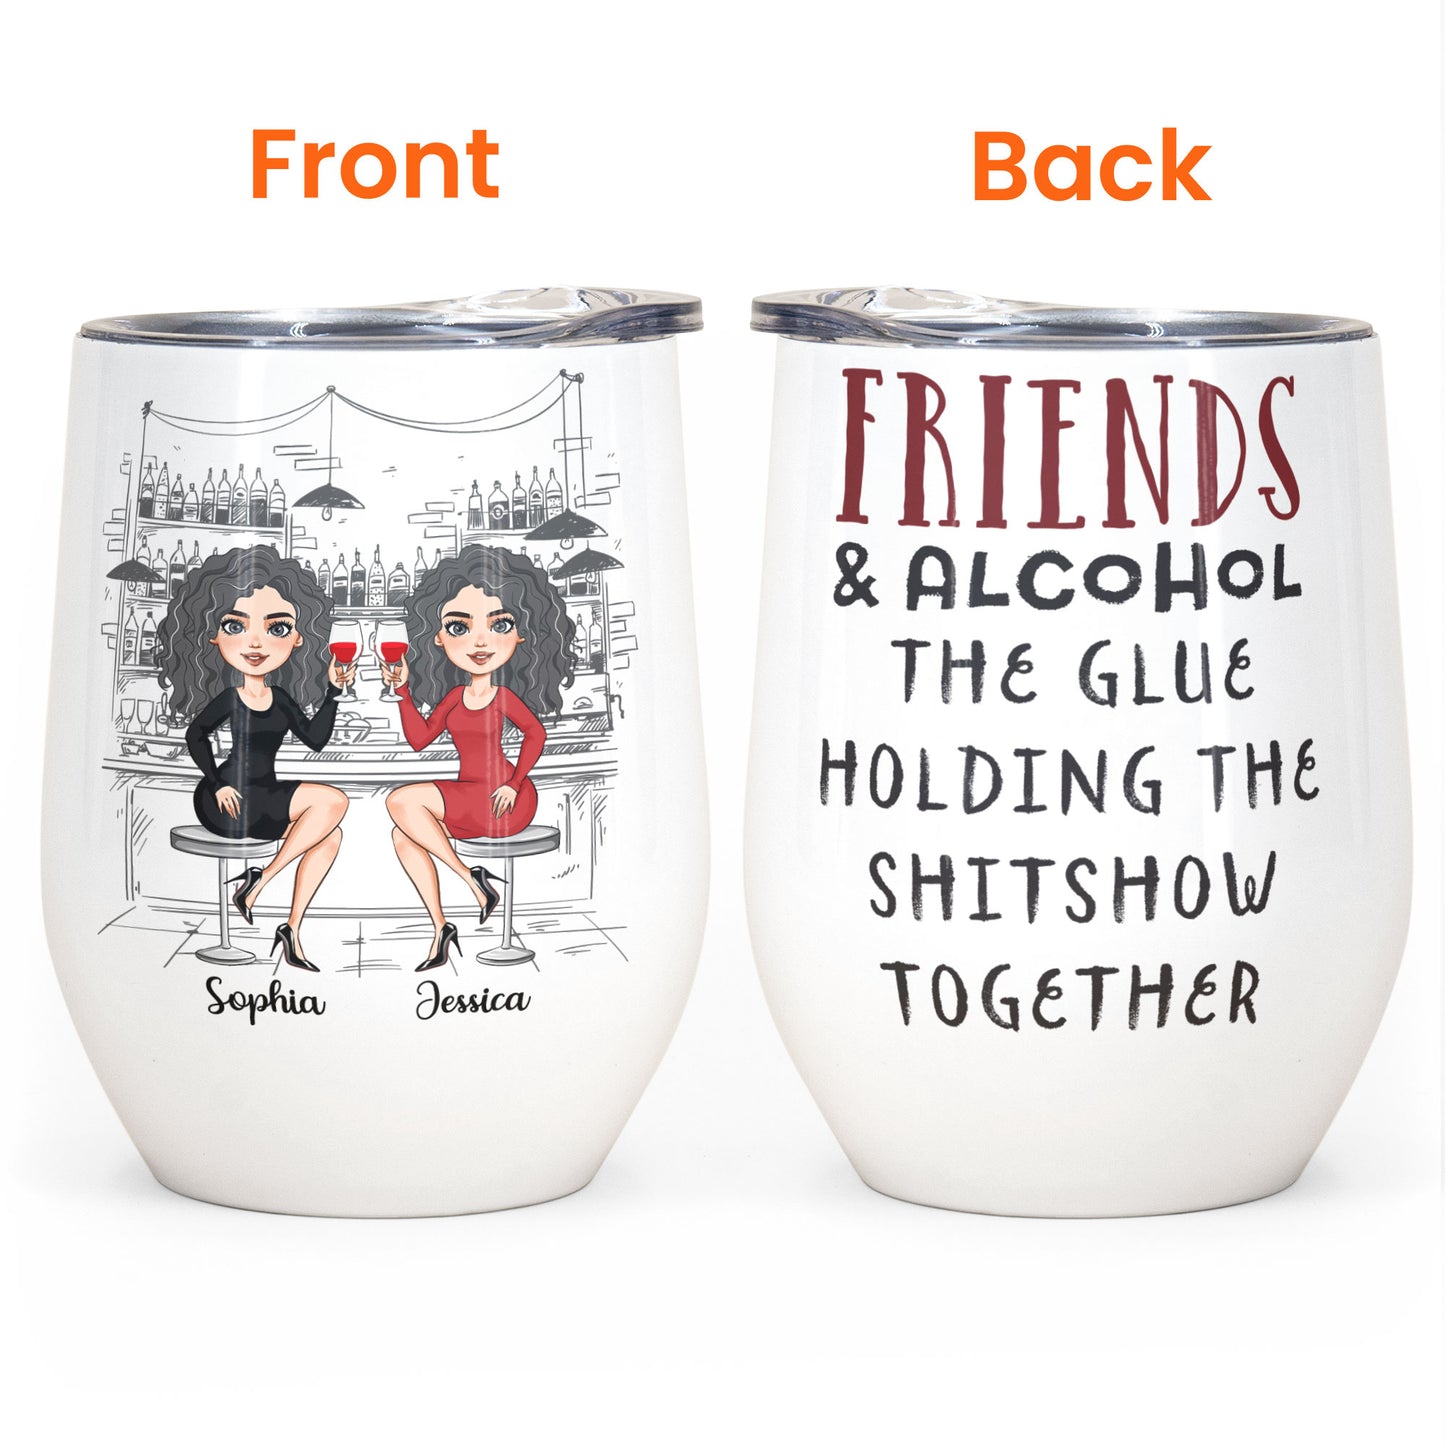 Friends And Alcohol The Glue Holding The Shitshow Together Ver 2  - Personalized Wine Tumbler - Birthday Gift For Friends, BFF, Besties, Soul Sisters, Drinking Teams - Drinking Team Illustration